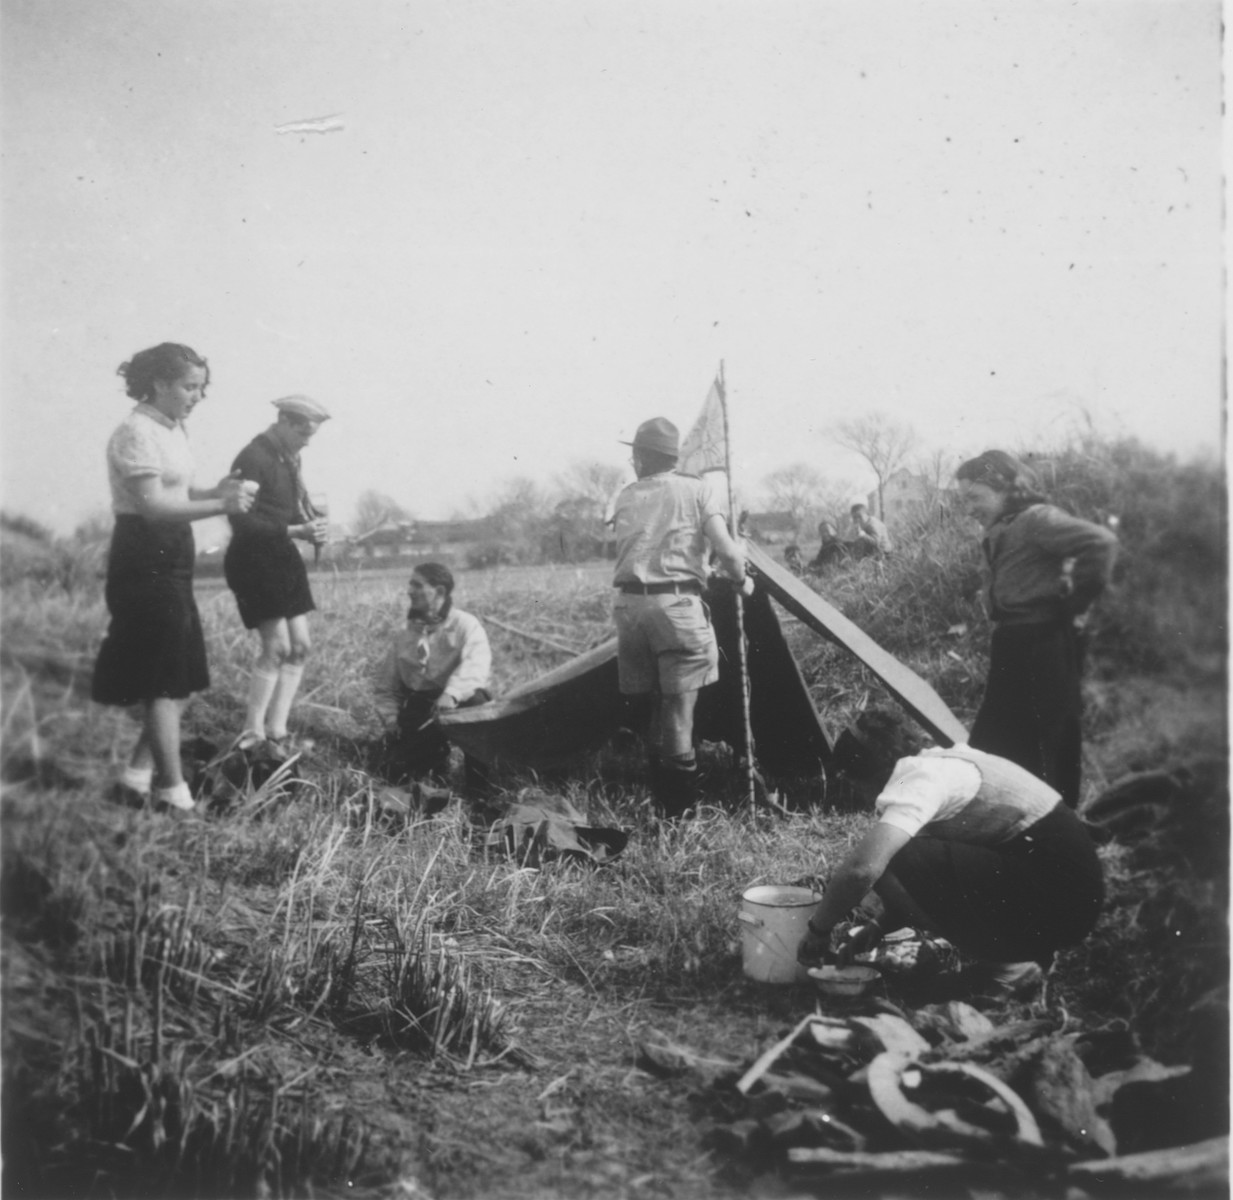 Jewish scouts set up a tent and prepare a meal during a camping trip to the Hunjow cemetery in Shanghai.

Among those pictured is Guenther Matzdorff.